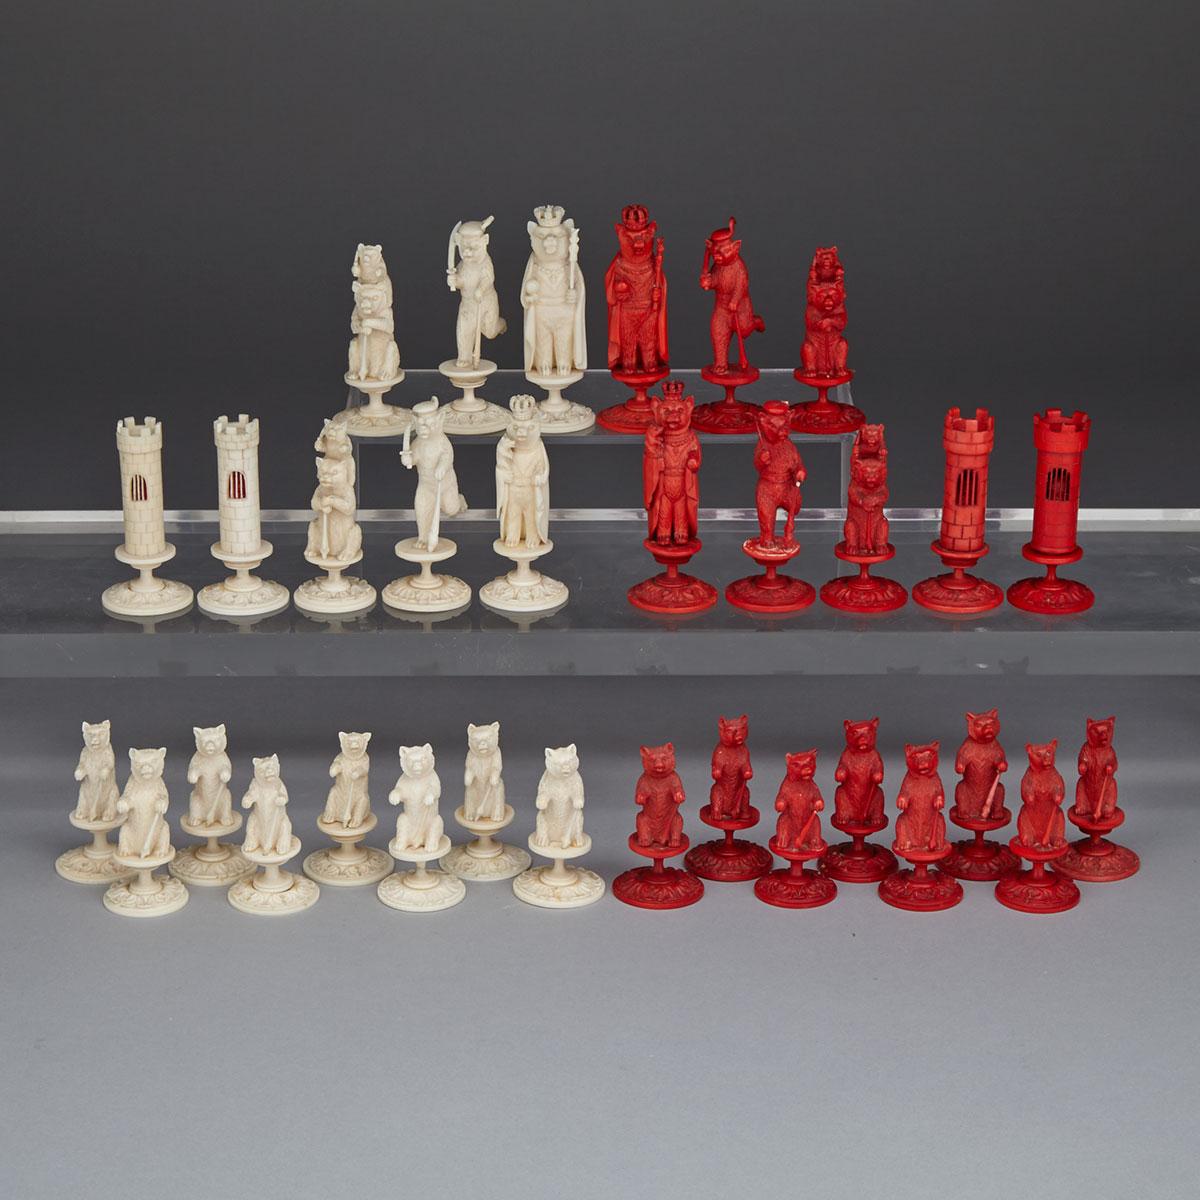 Swiss Carved Ivory ‘Bears of Berne’ Chess Set, 19th century